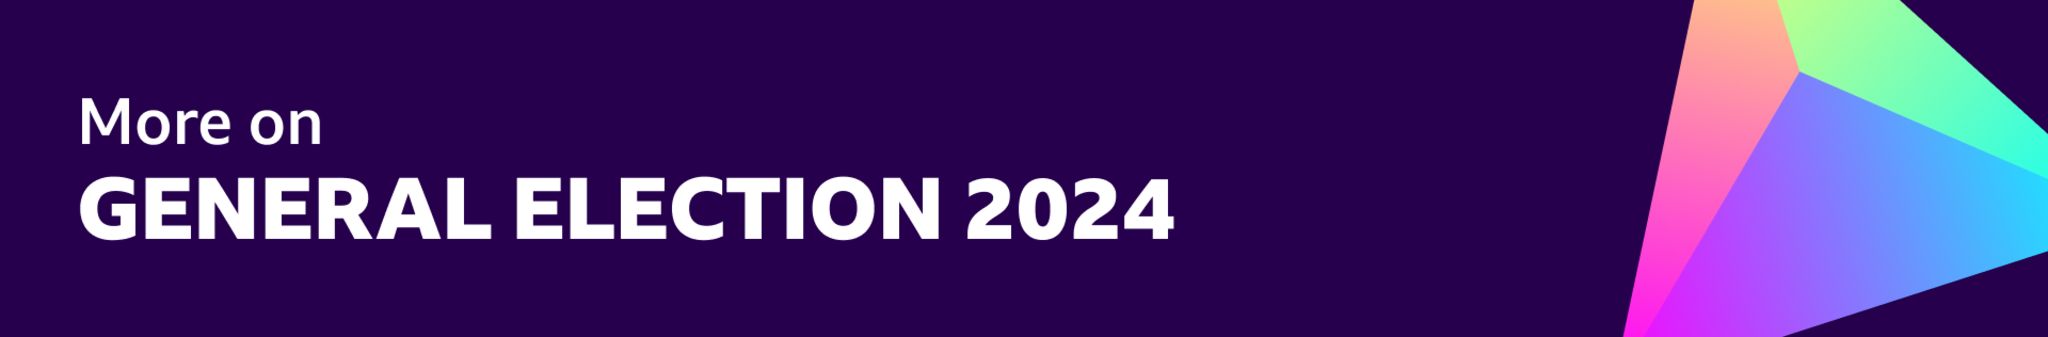 General election branding with a purple background